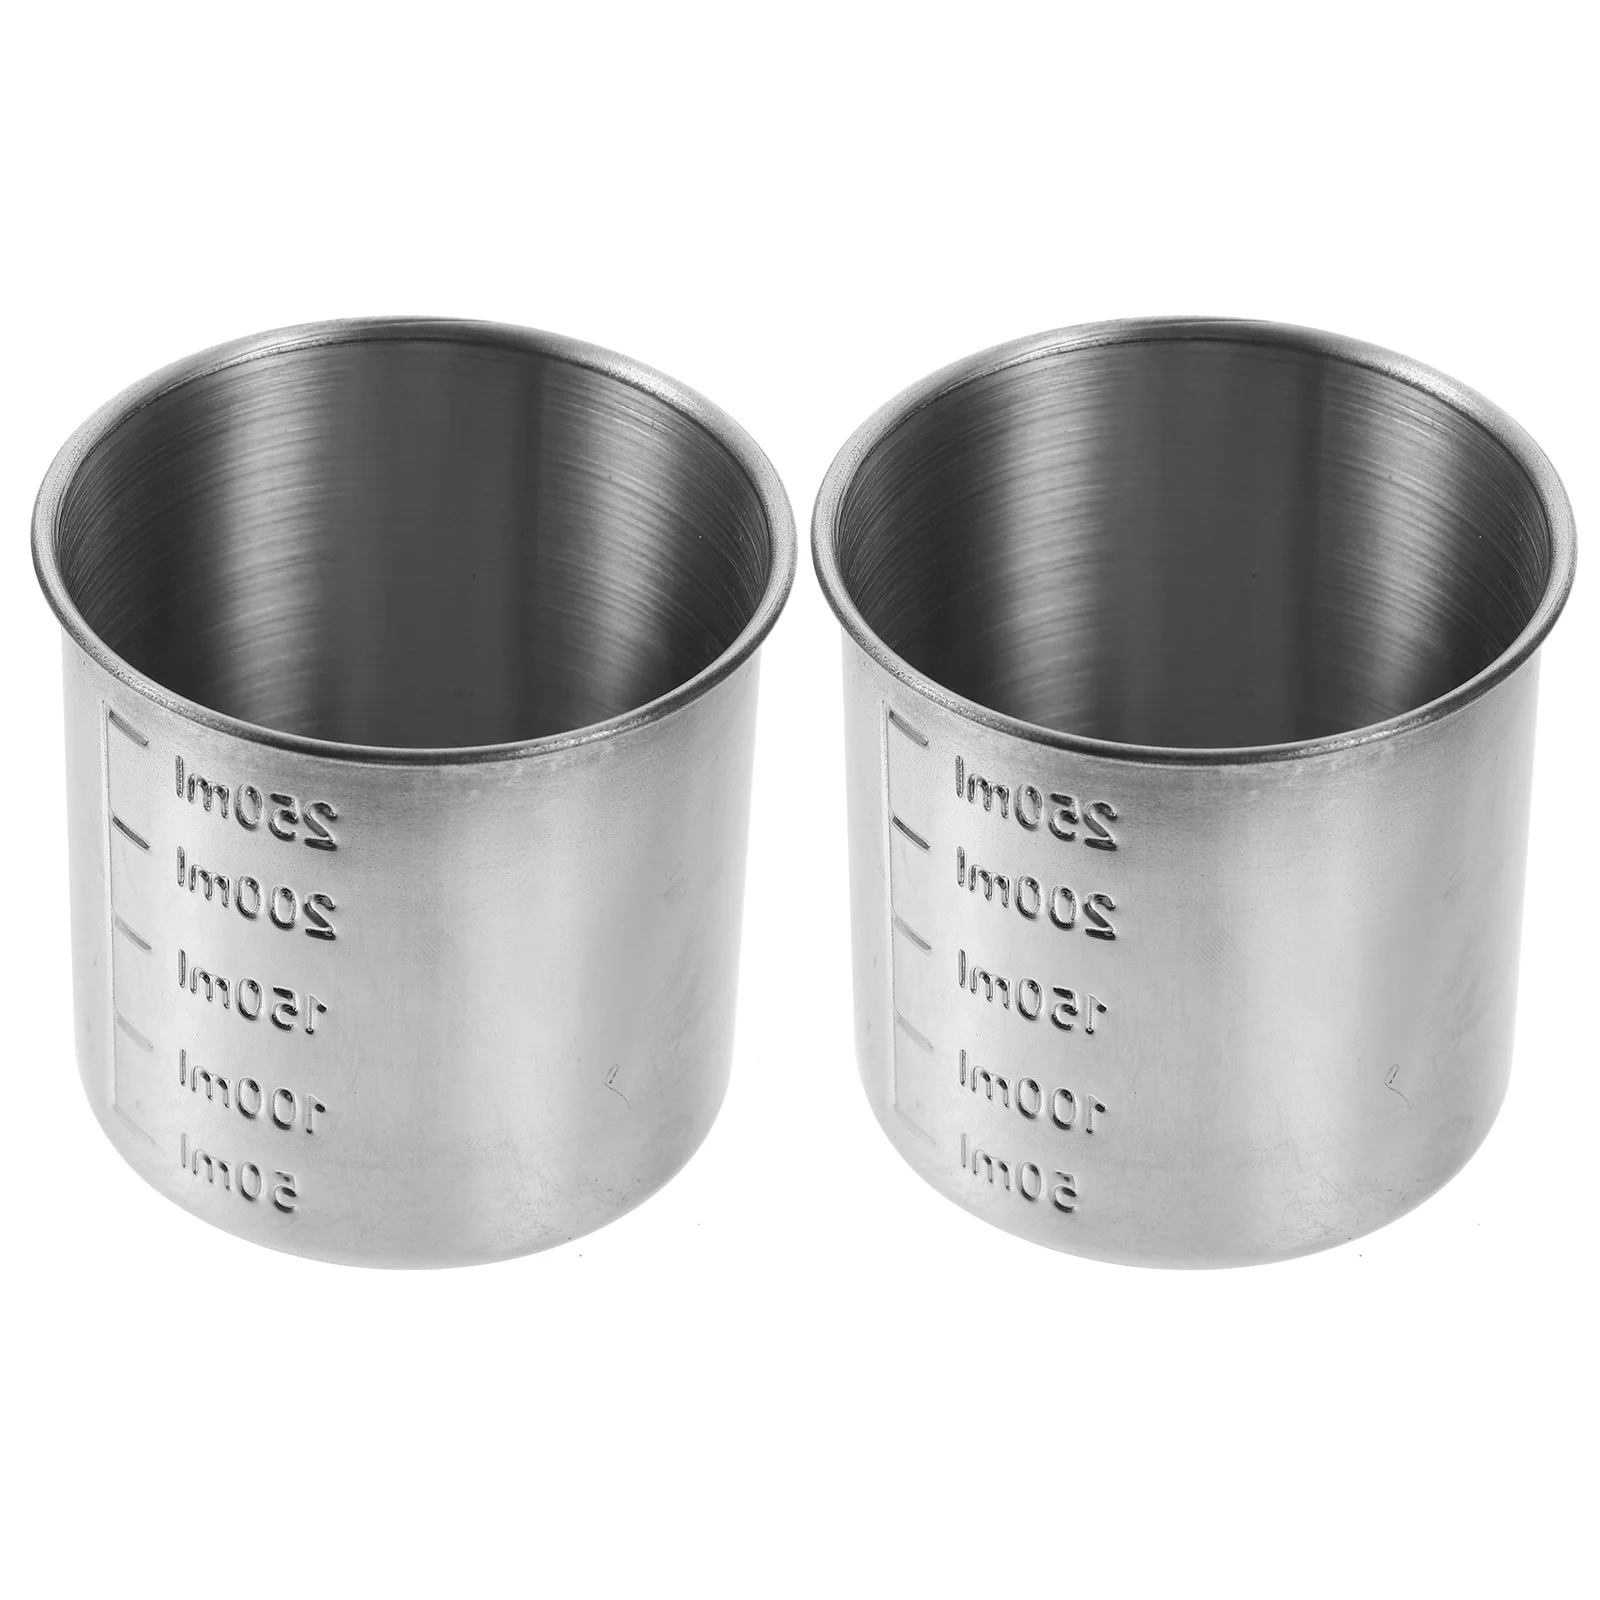 

2 Pcs Food Containers Rice Drinking Cup Stainless Measuring Holder Household Steel